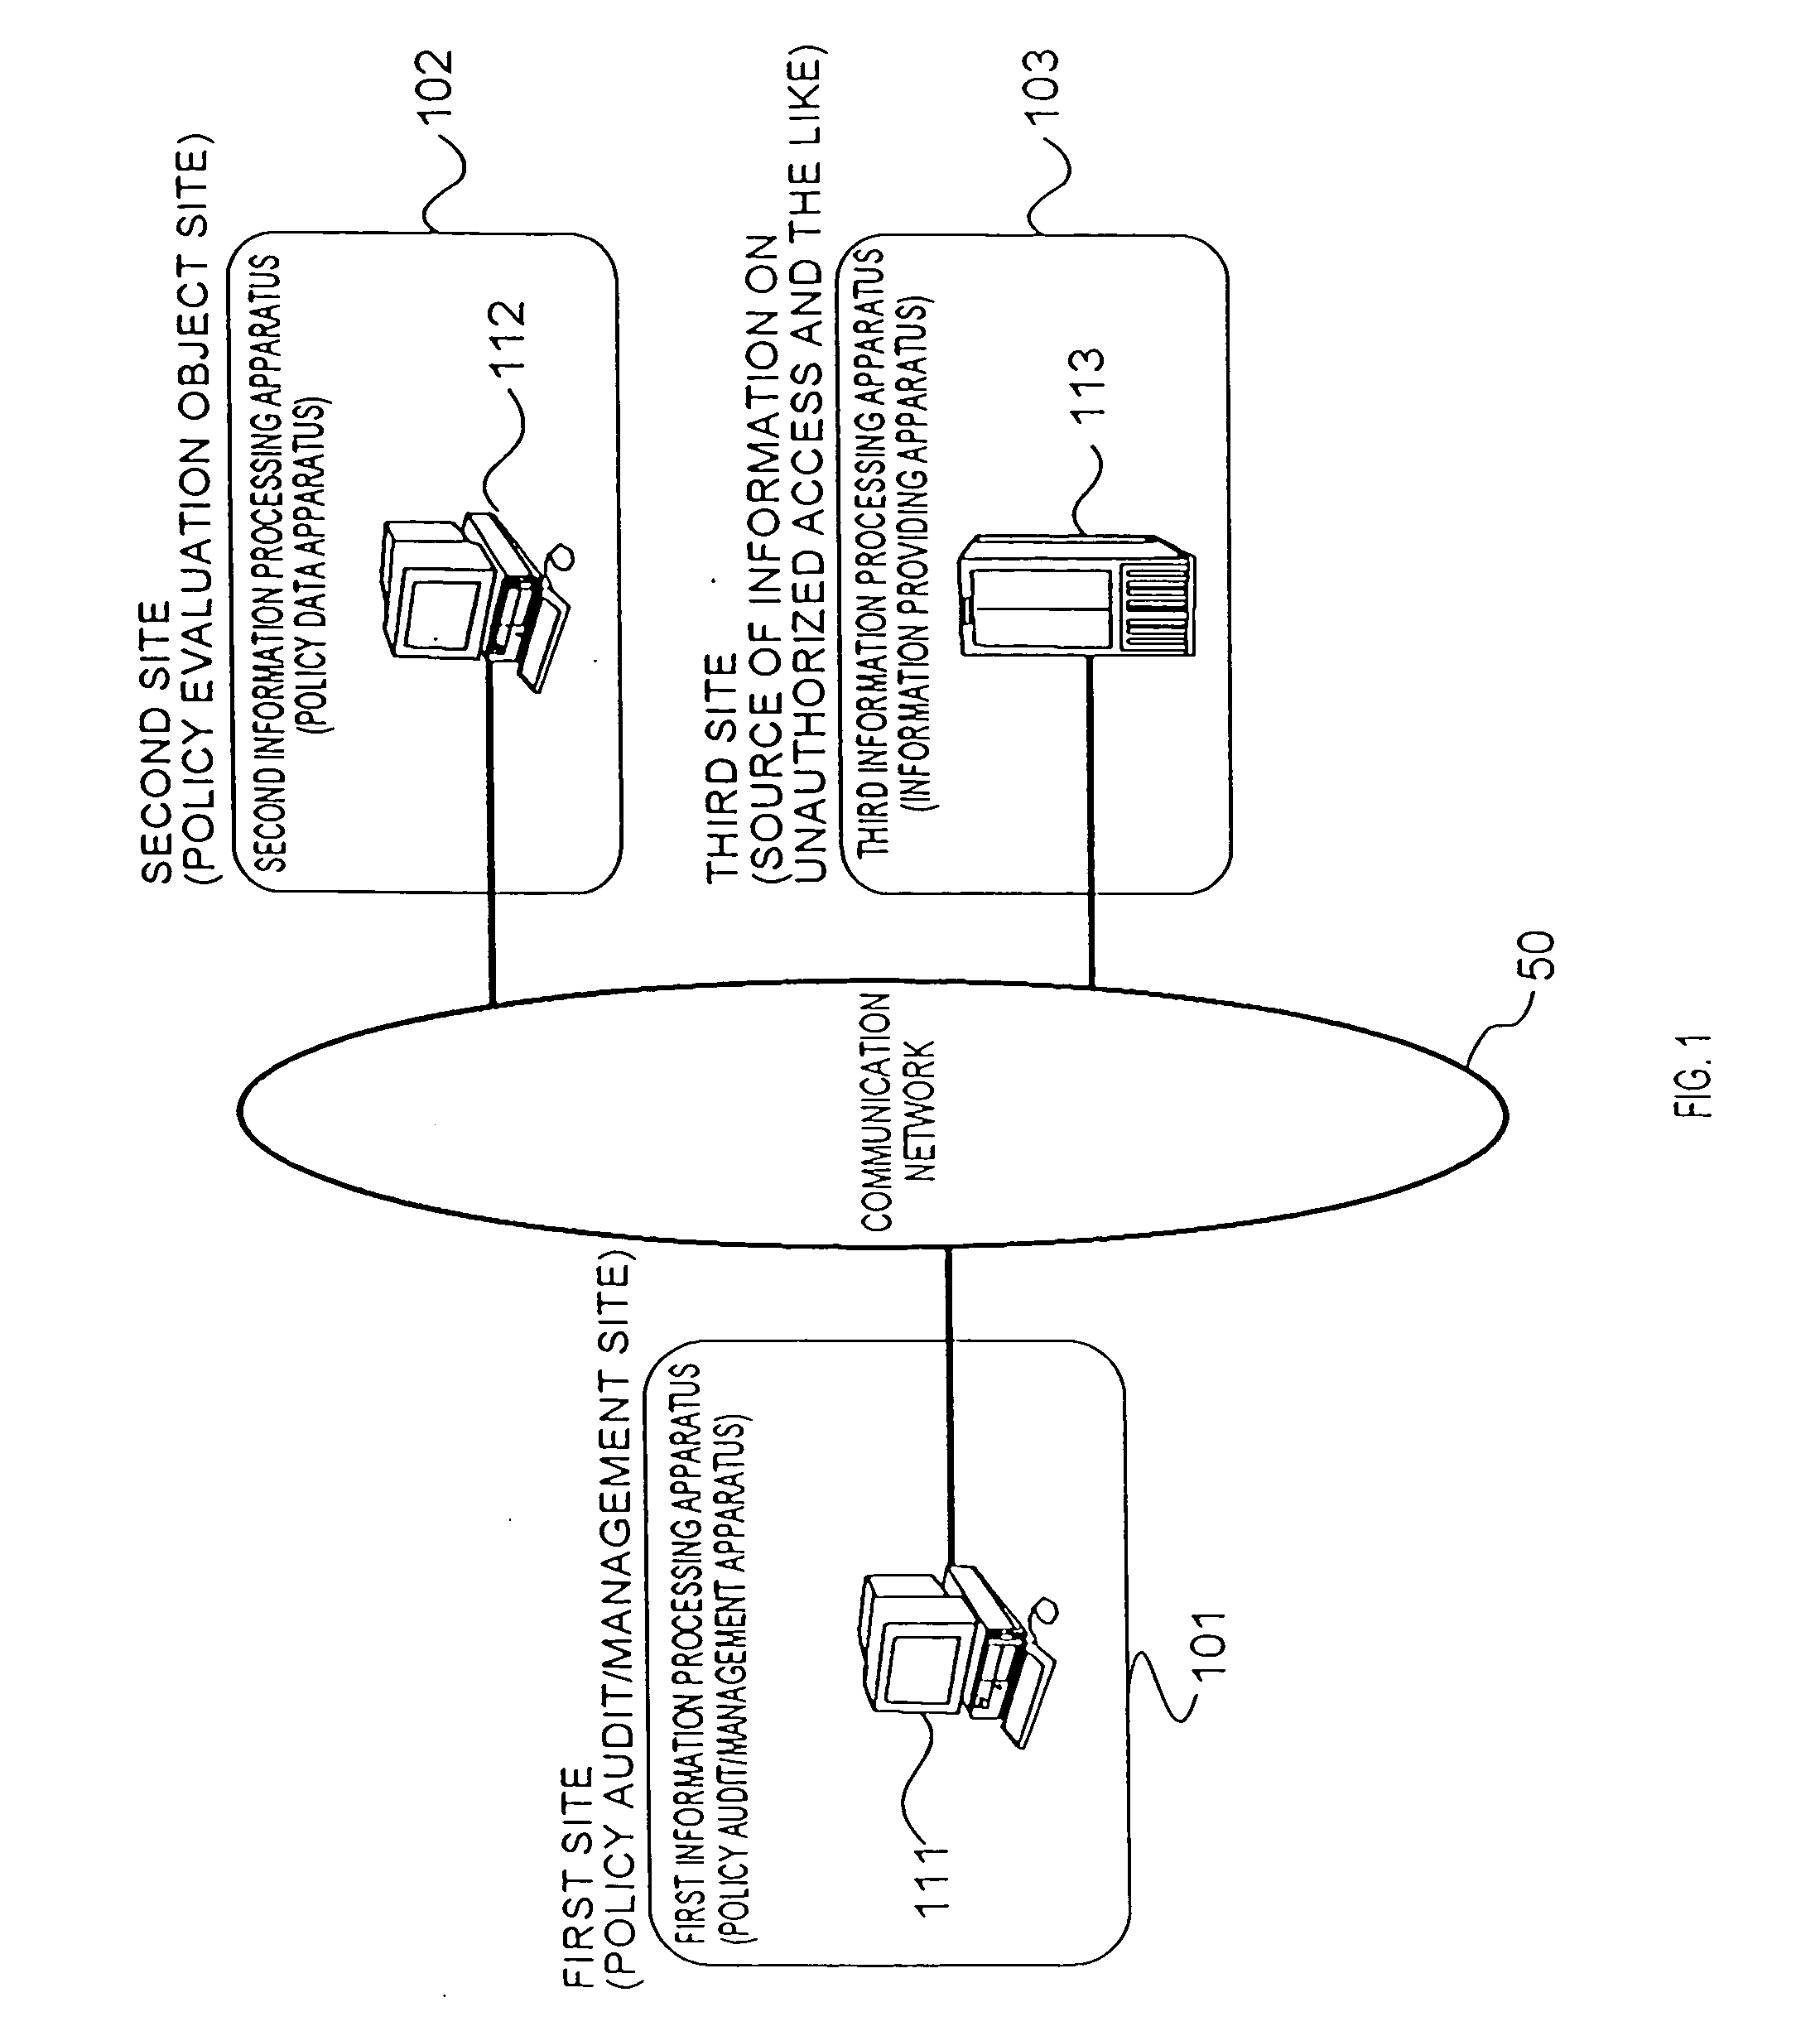 Information security policy evaluation system and method of controlling the same